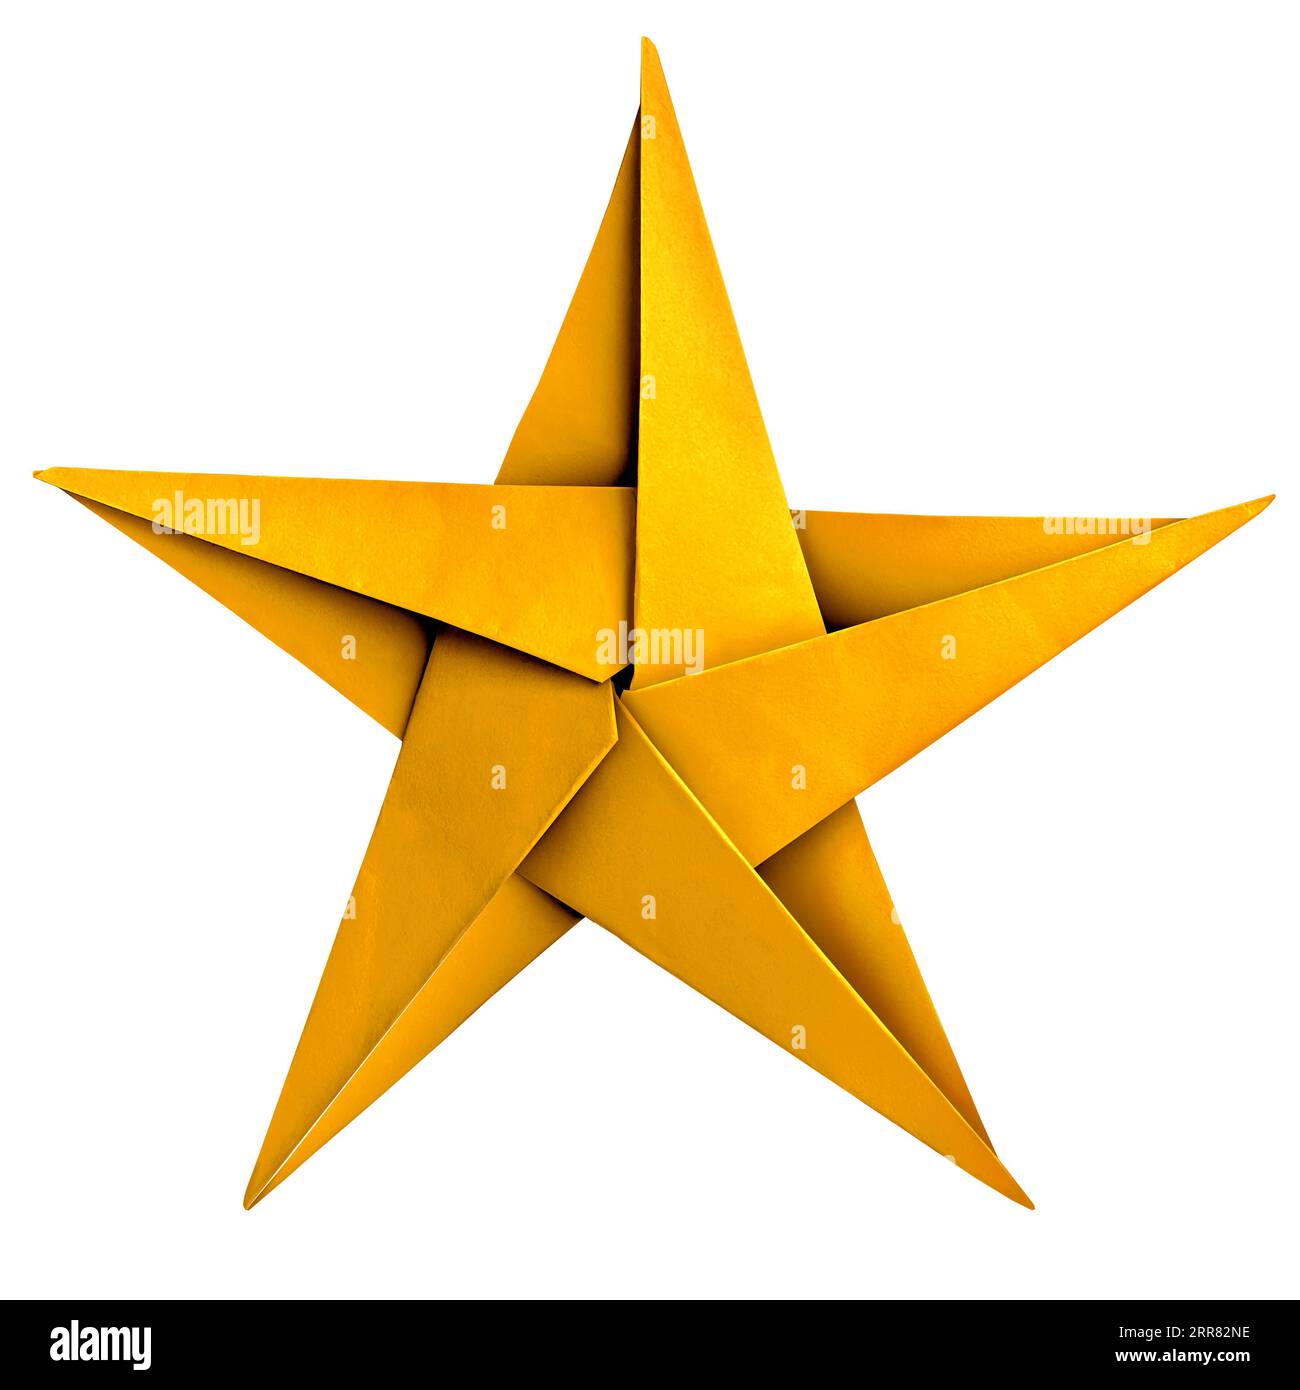 Gold Paper Star as a symbol of Winning as an origami Sculpture for success symbol as a golden winning first place award object Stock Photo